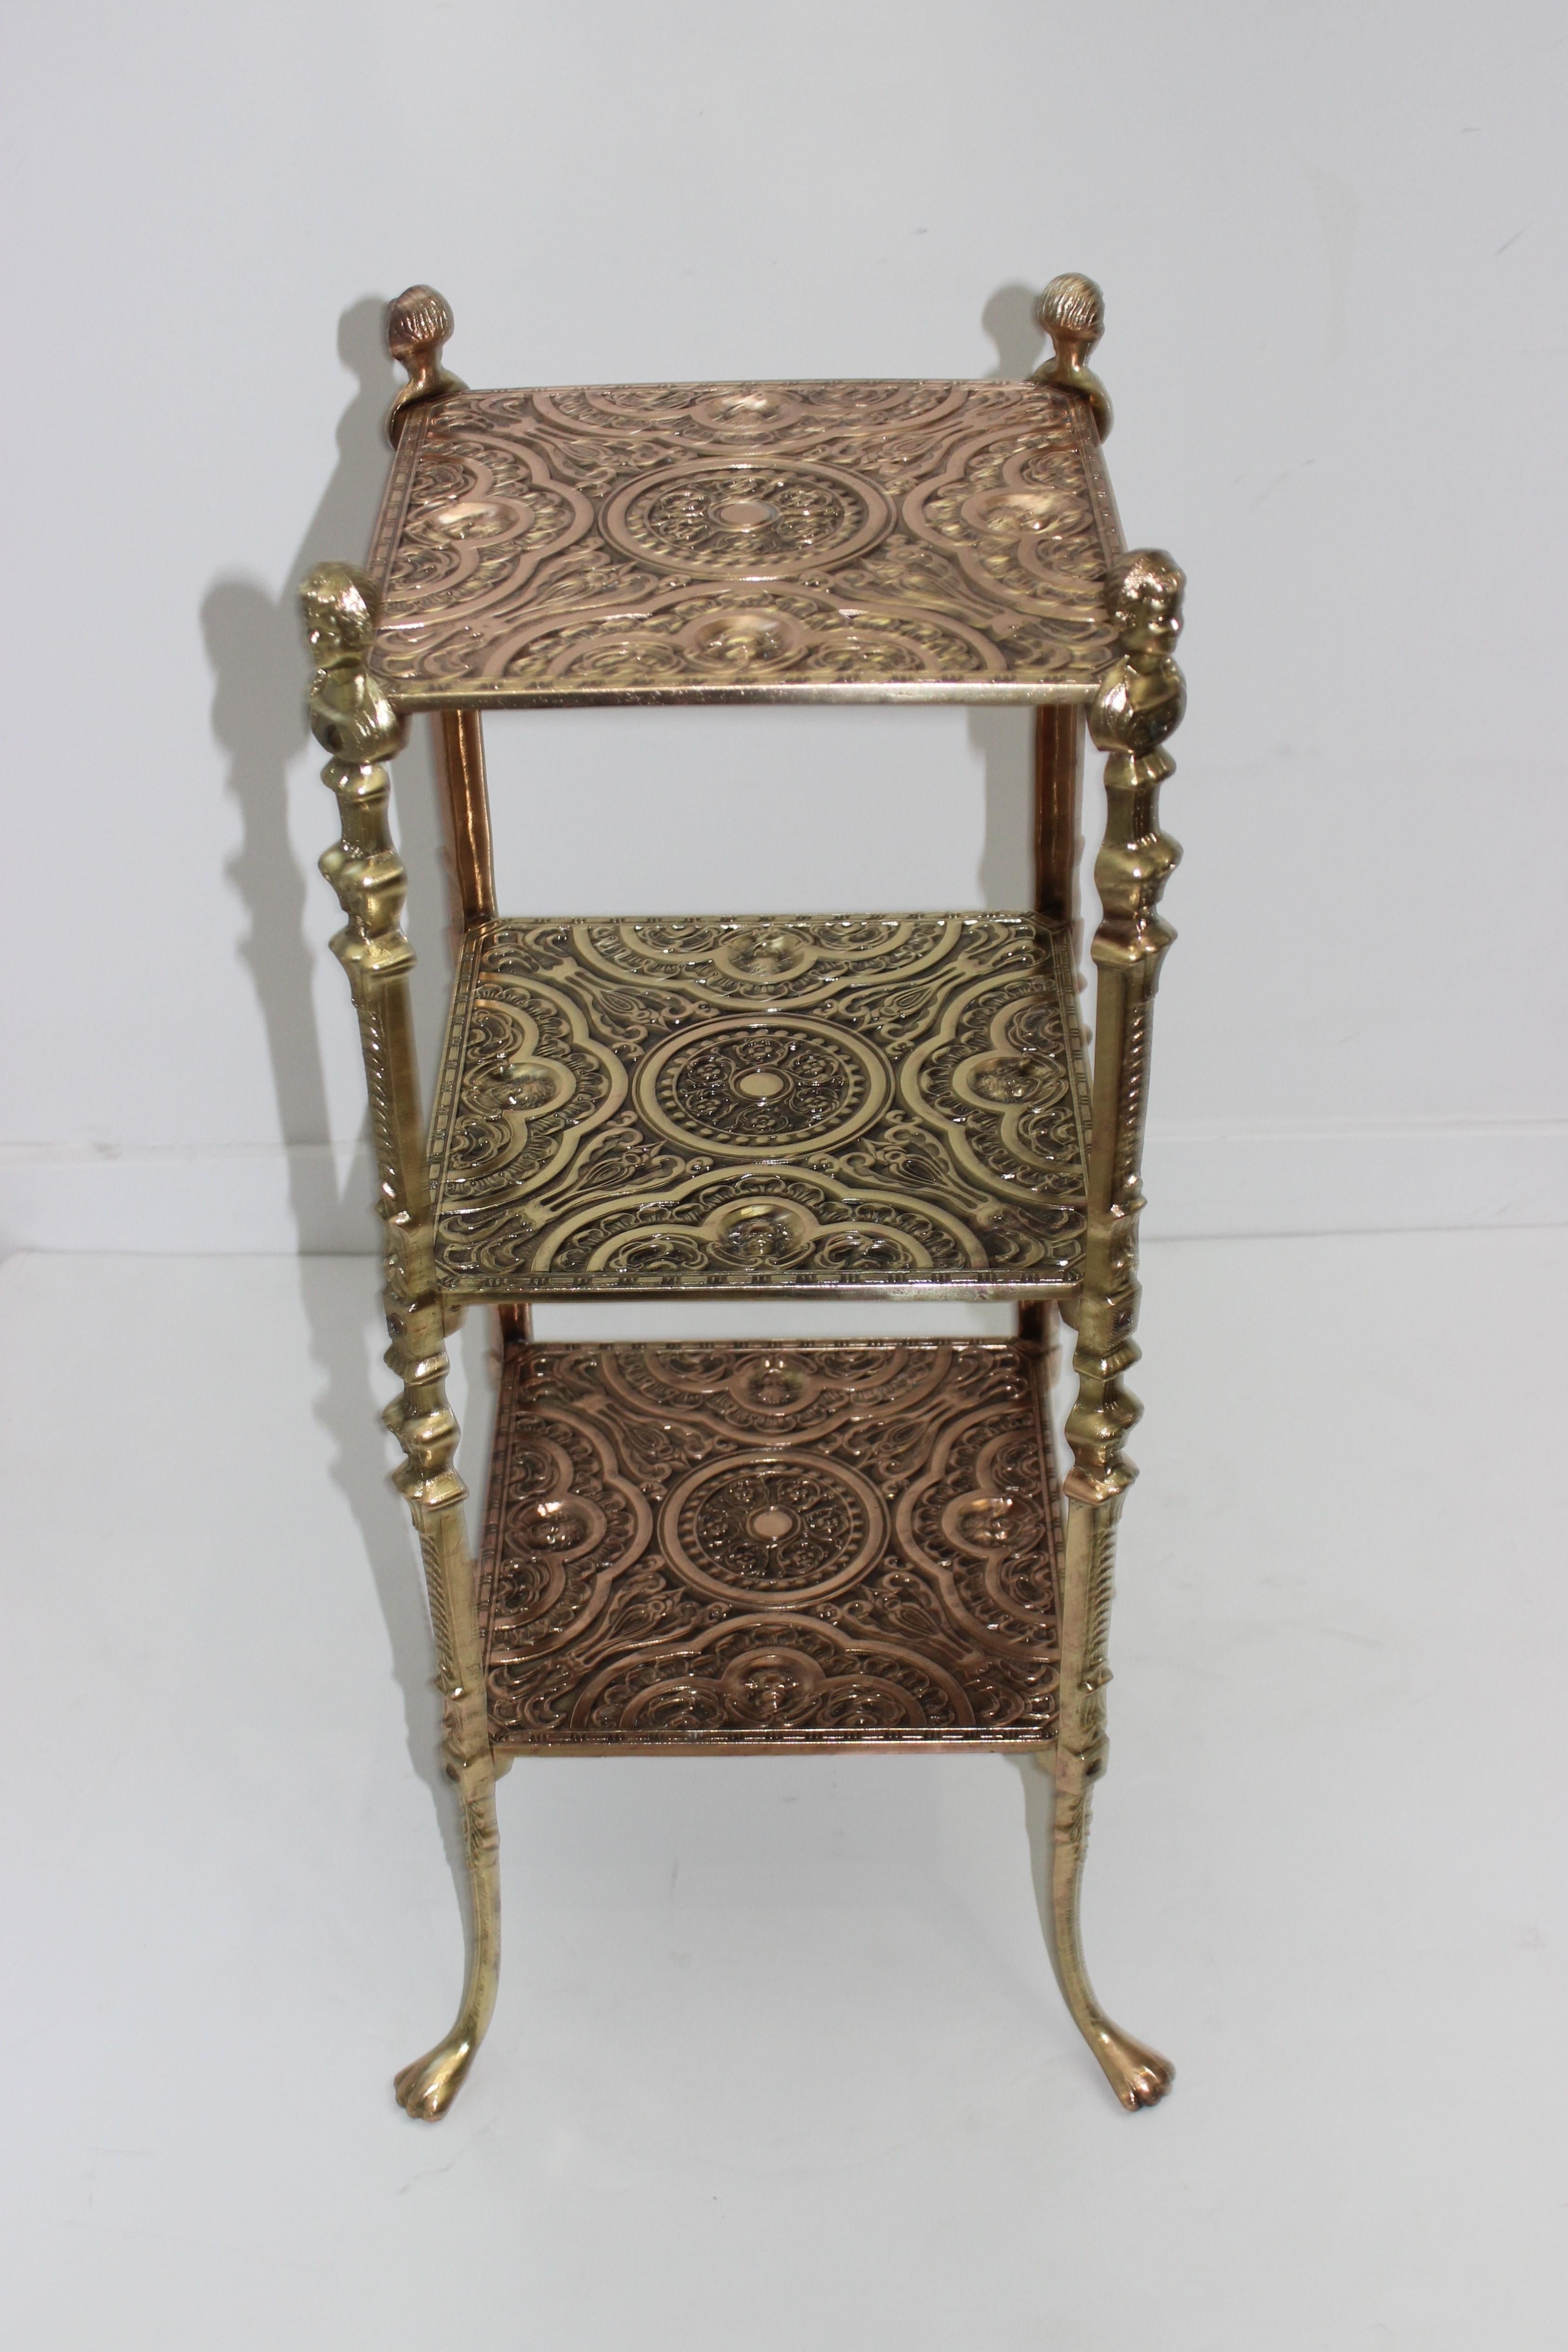 3 tiered side table